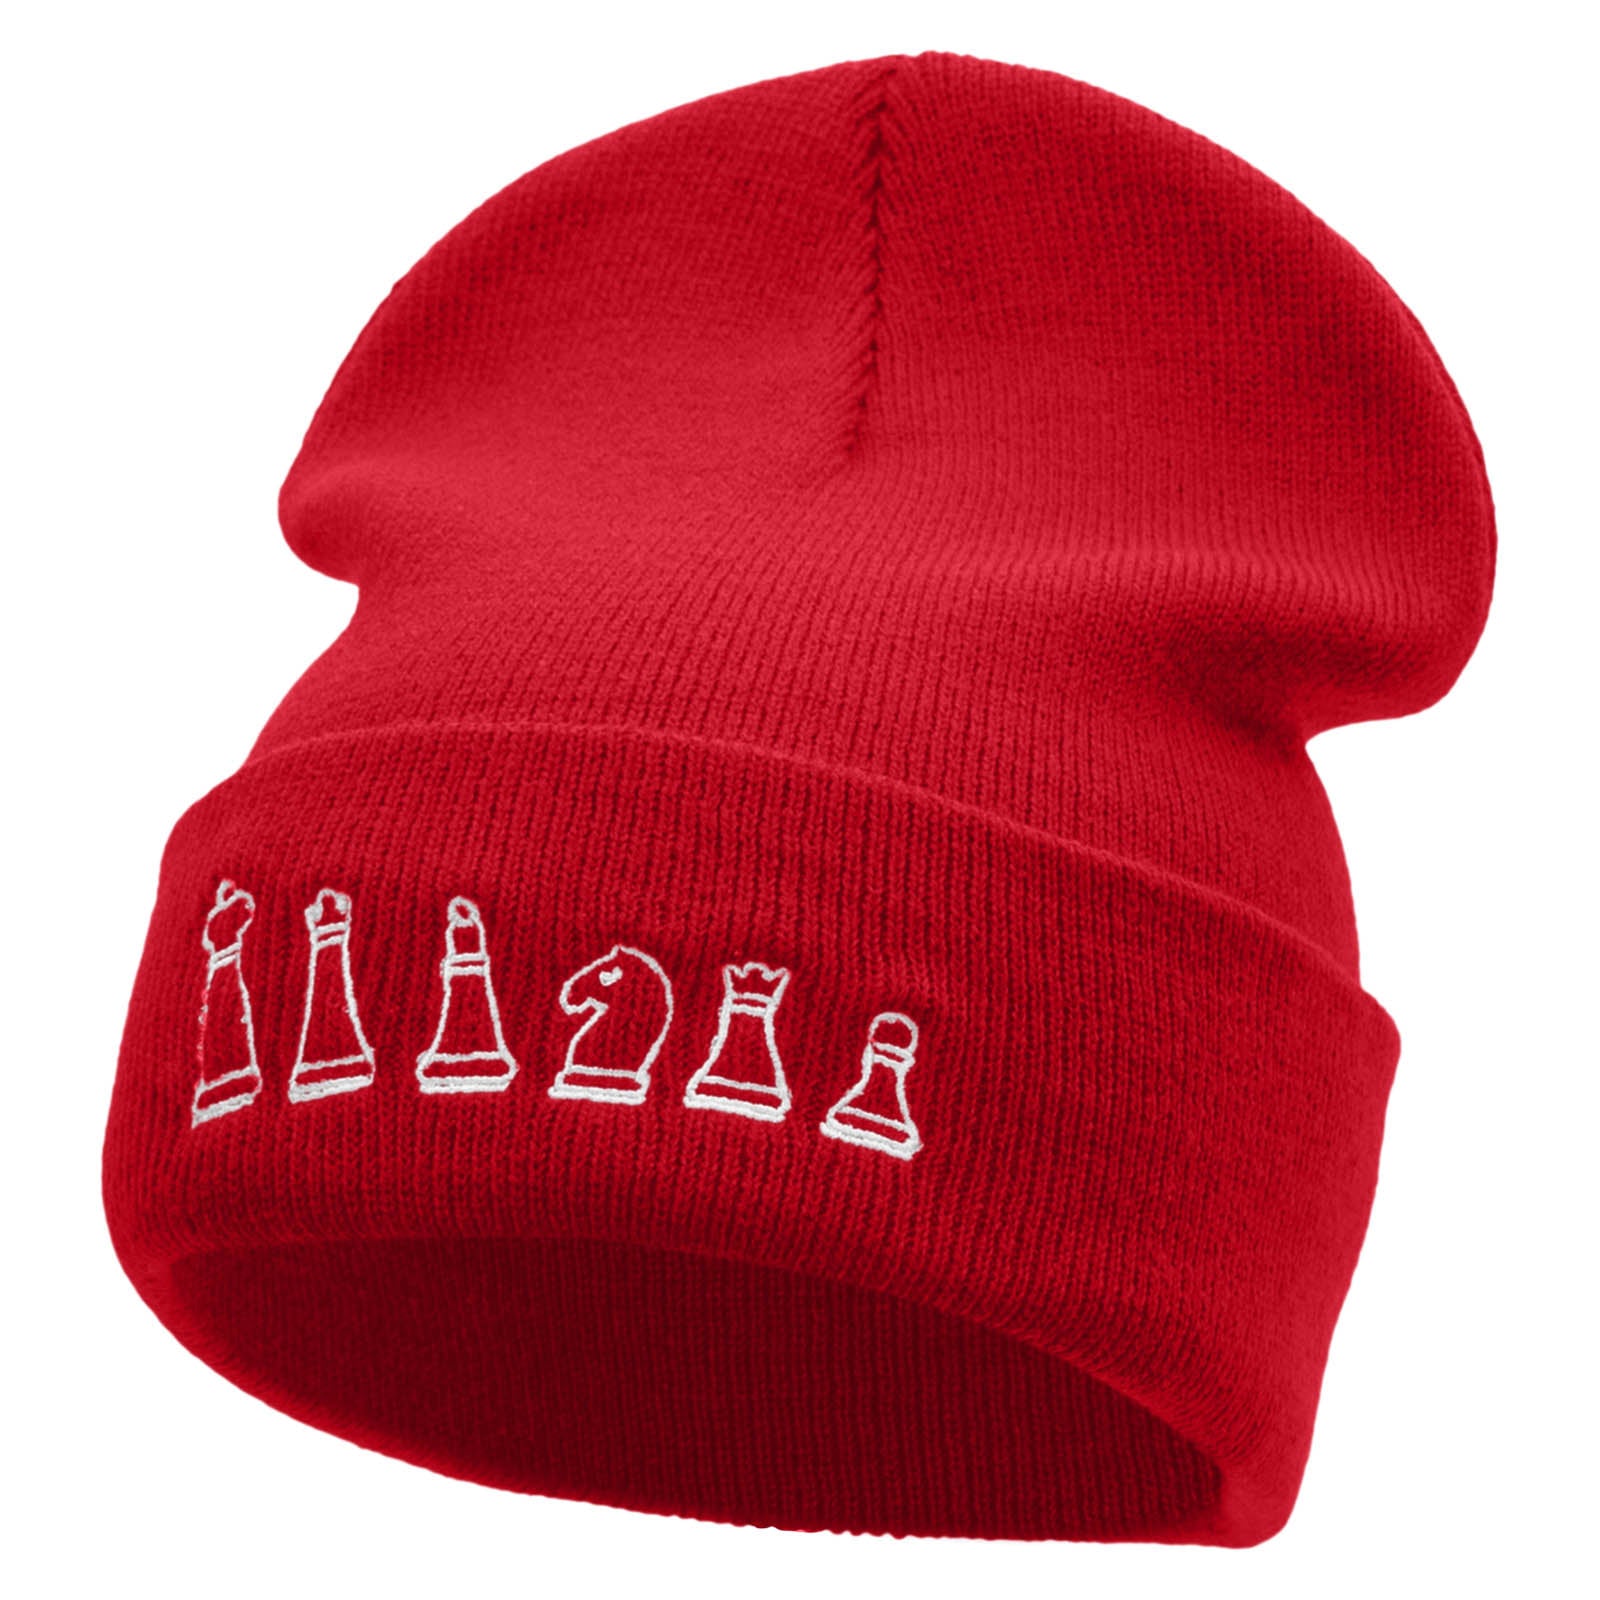 The Chest Set Embroidered 12 Inch Long Knitted Beanie - Red OSFM